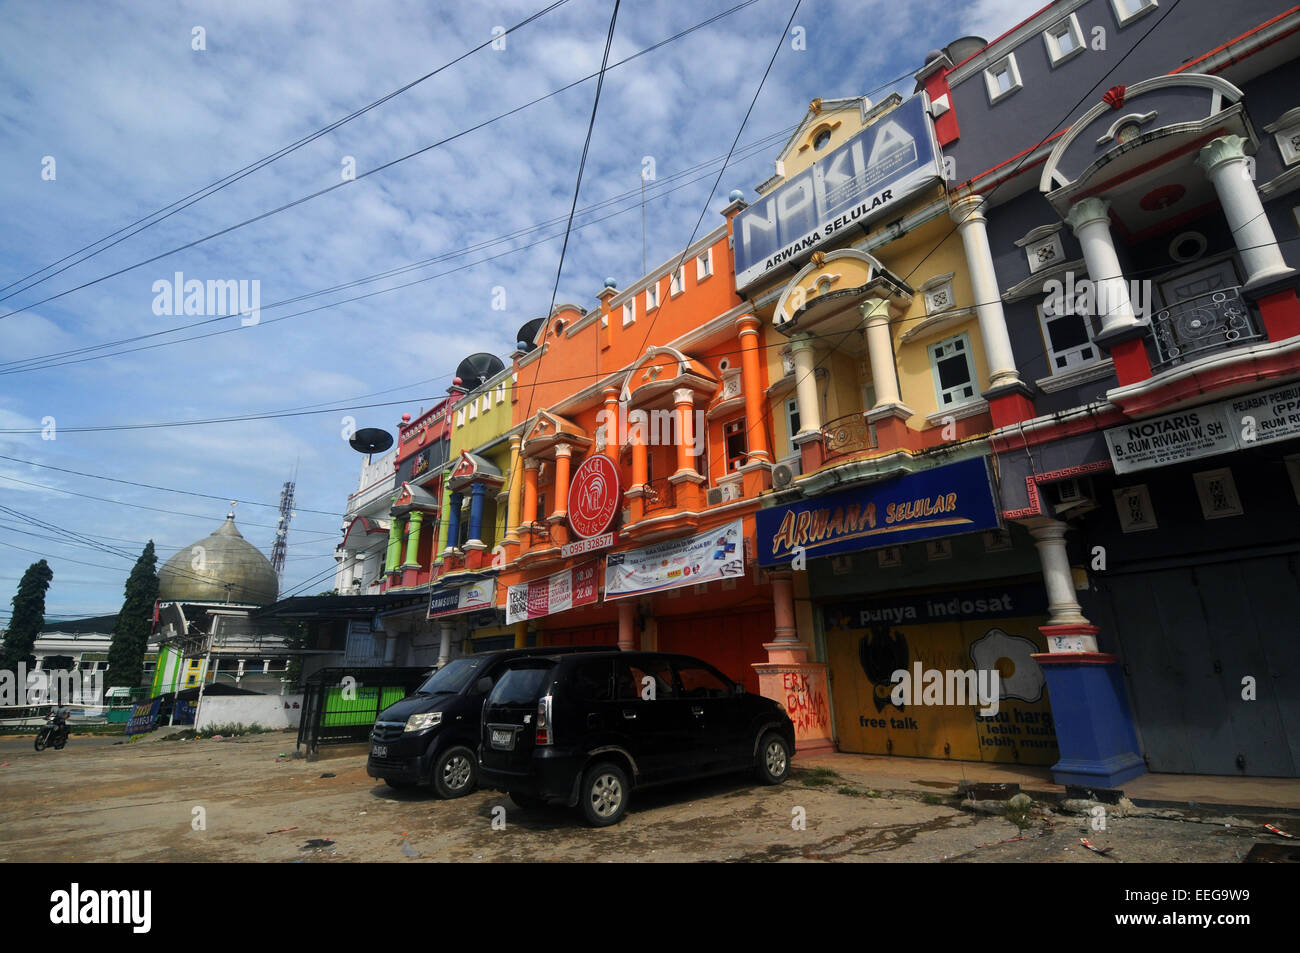 Shops and mosque along main street in Sorong, Papua province, Indonesia. No PR Stock Photo